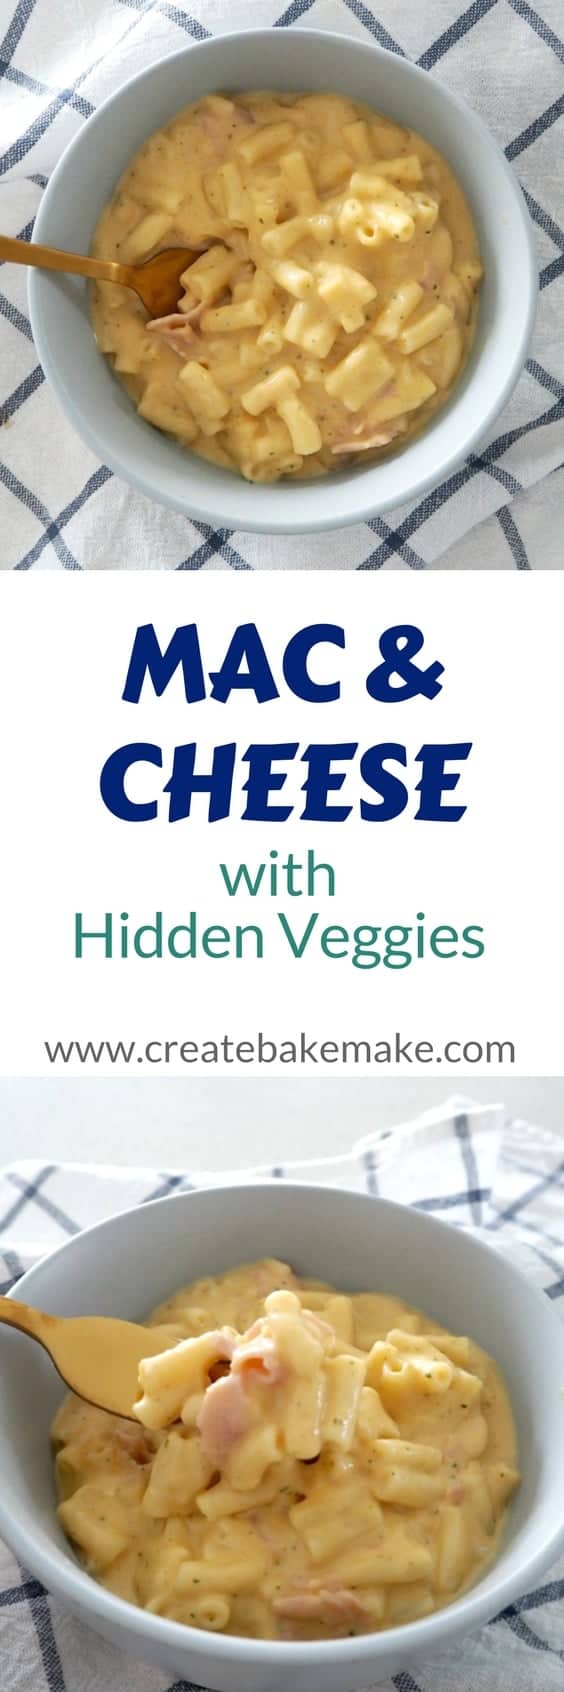 Thermomix Mac and Cheese with Hidden Veggies